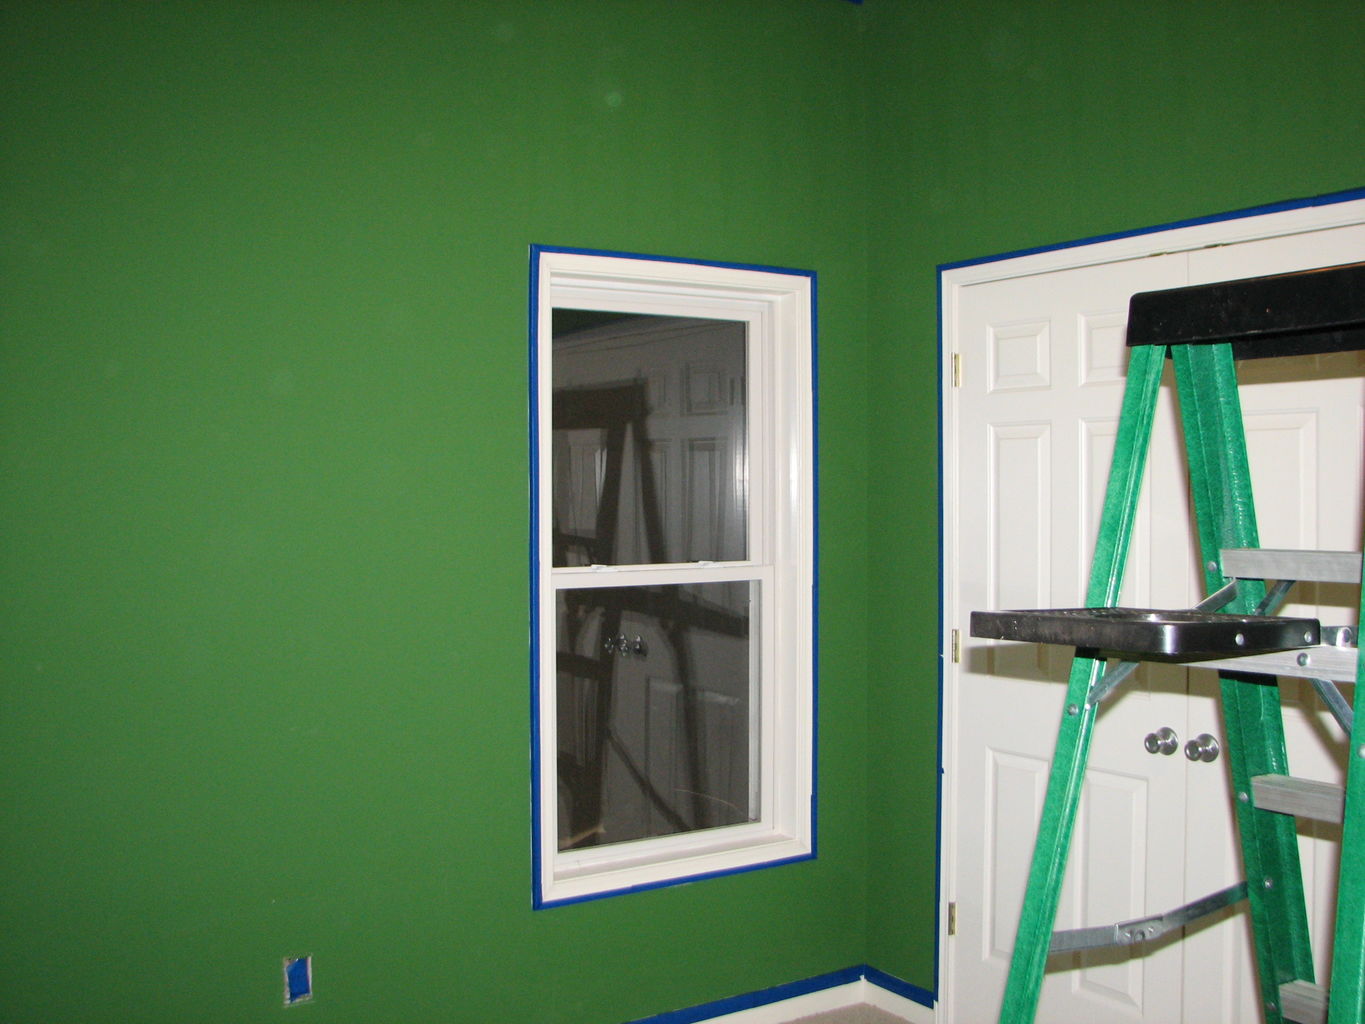 Erin Paints the Green Room
